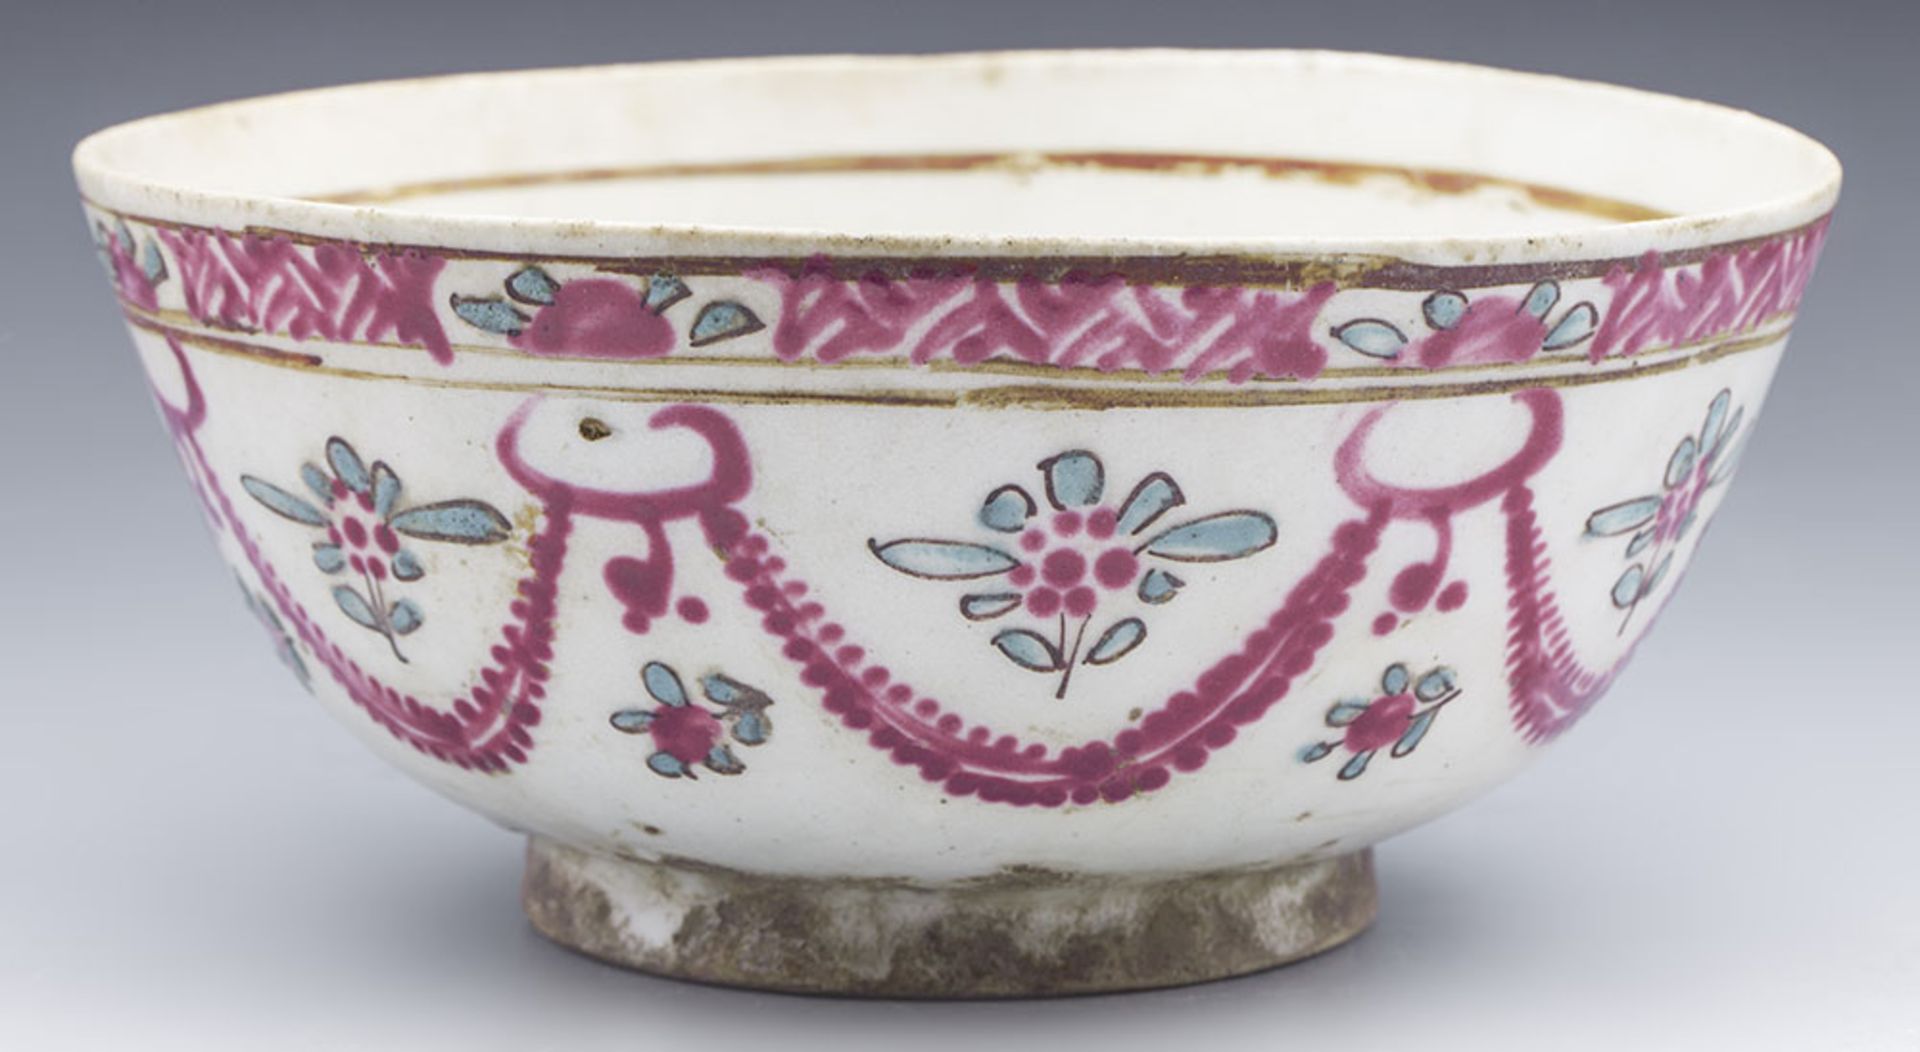 ANTIQUE MIDDLE EASTERN BOWL WITH FLORAL GARLANDS 17/18TH C. - Image 11 of 12